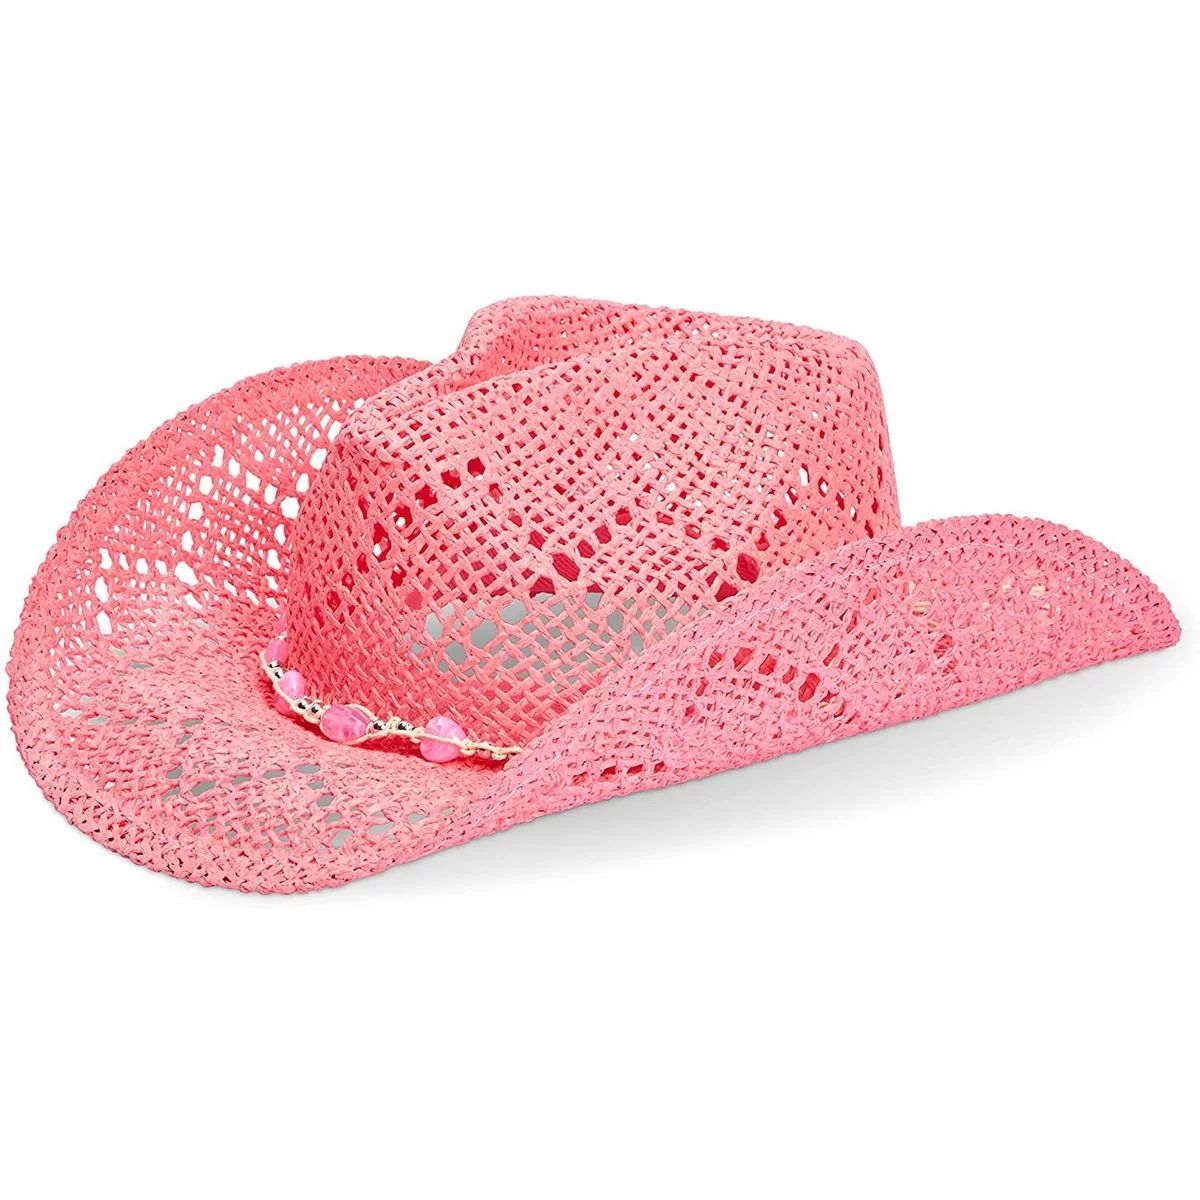 Pink Straw Cowgirl Hat for Women with Braided Heart Chain, Beach Cowboy Head Accessories | Walmart (US)